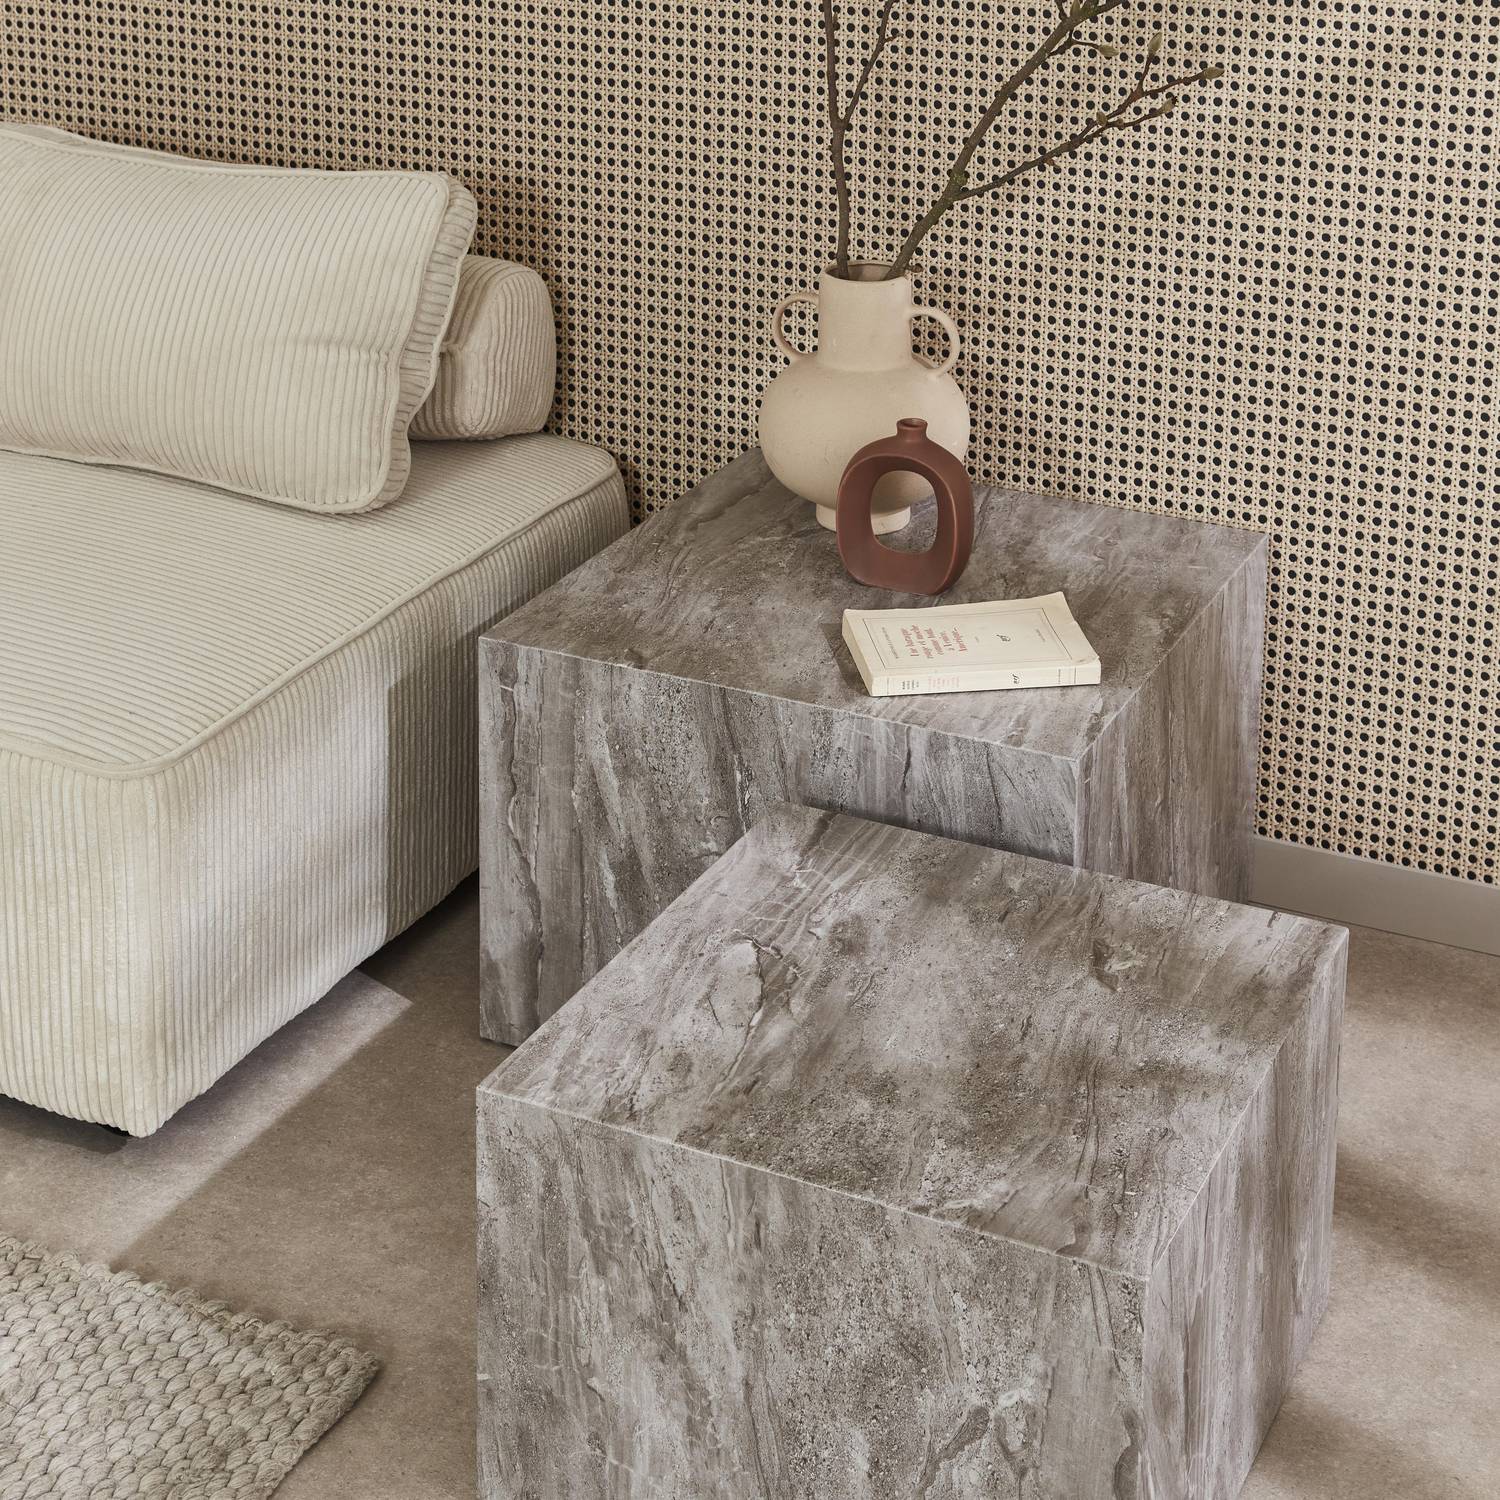 Set of 2 square coffee tables with marble effect, grey, L50xW50xH33cm &  L58xW58xH40cm, Paros Photo2